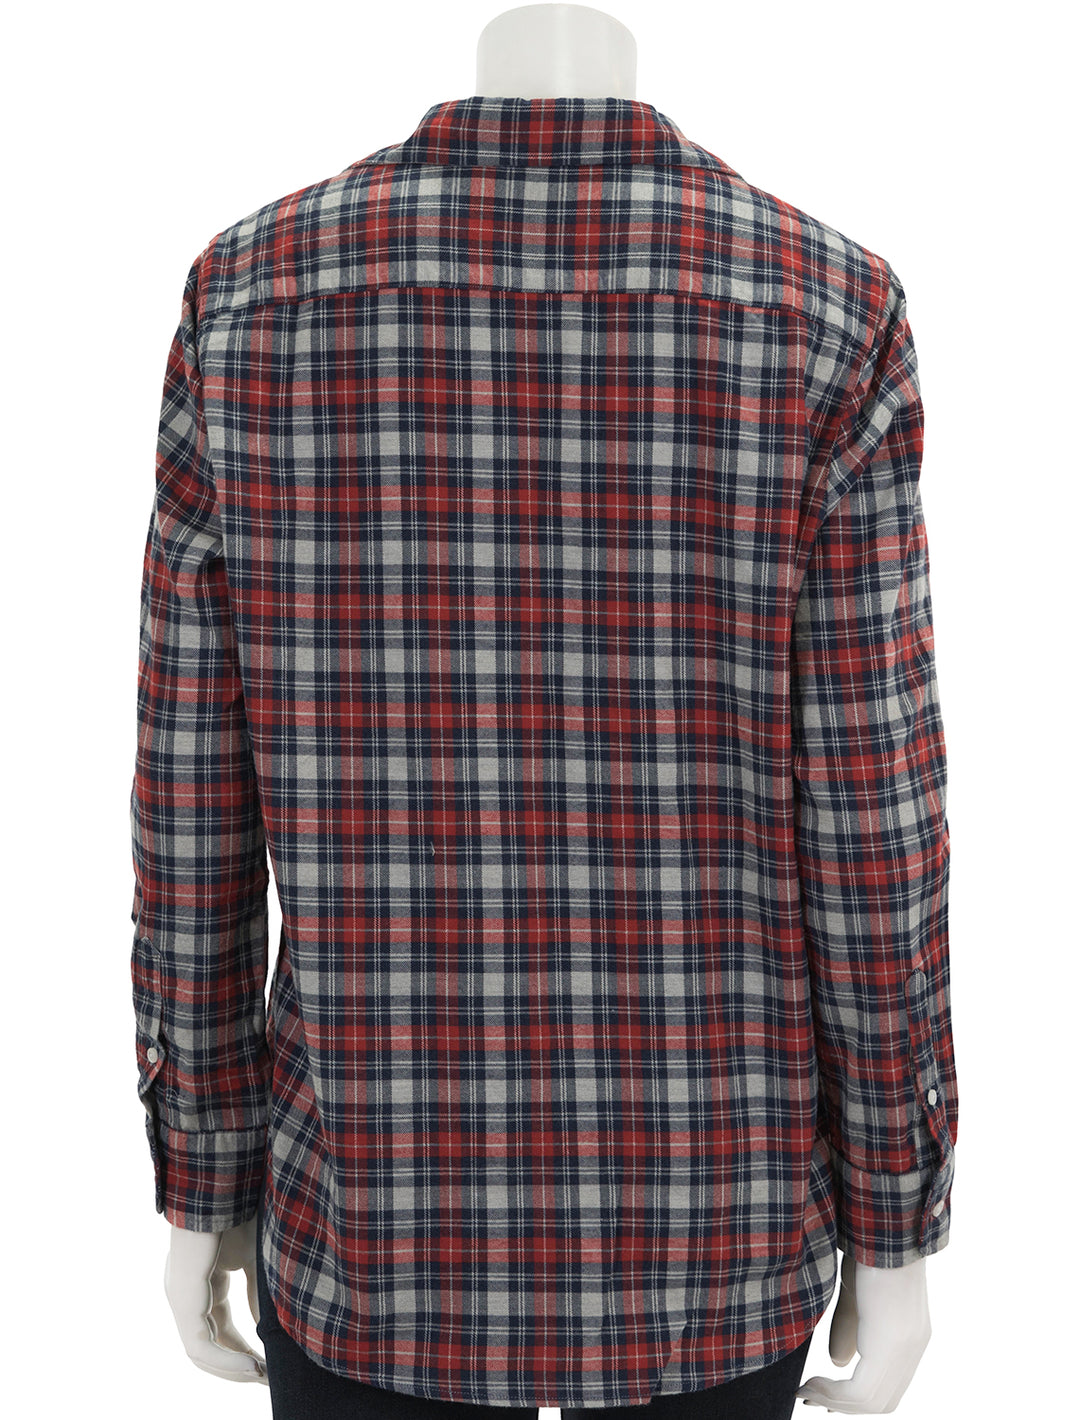 Back view of Frank & Eileen's eileen in red grey and navy plaid.